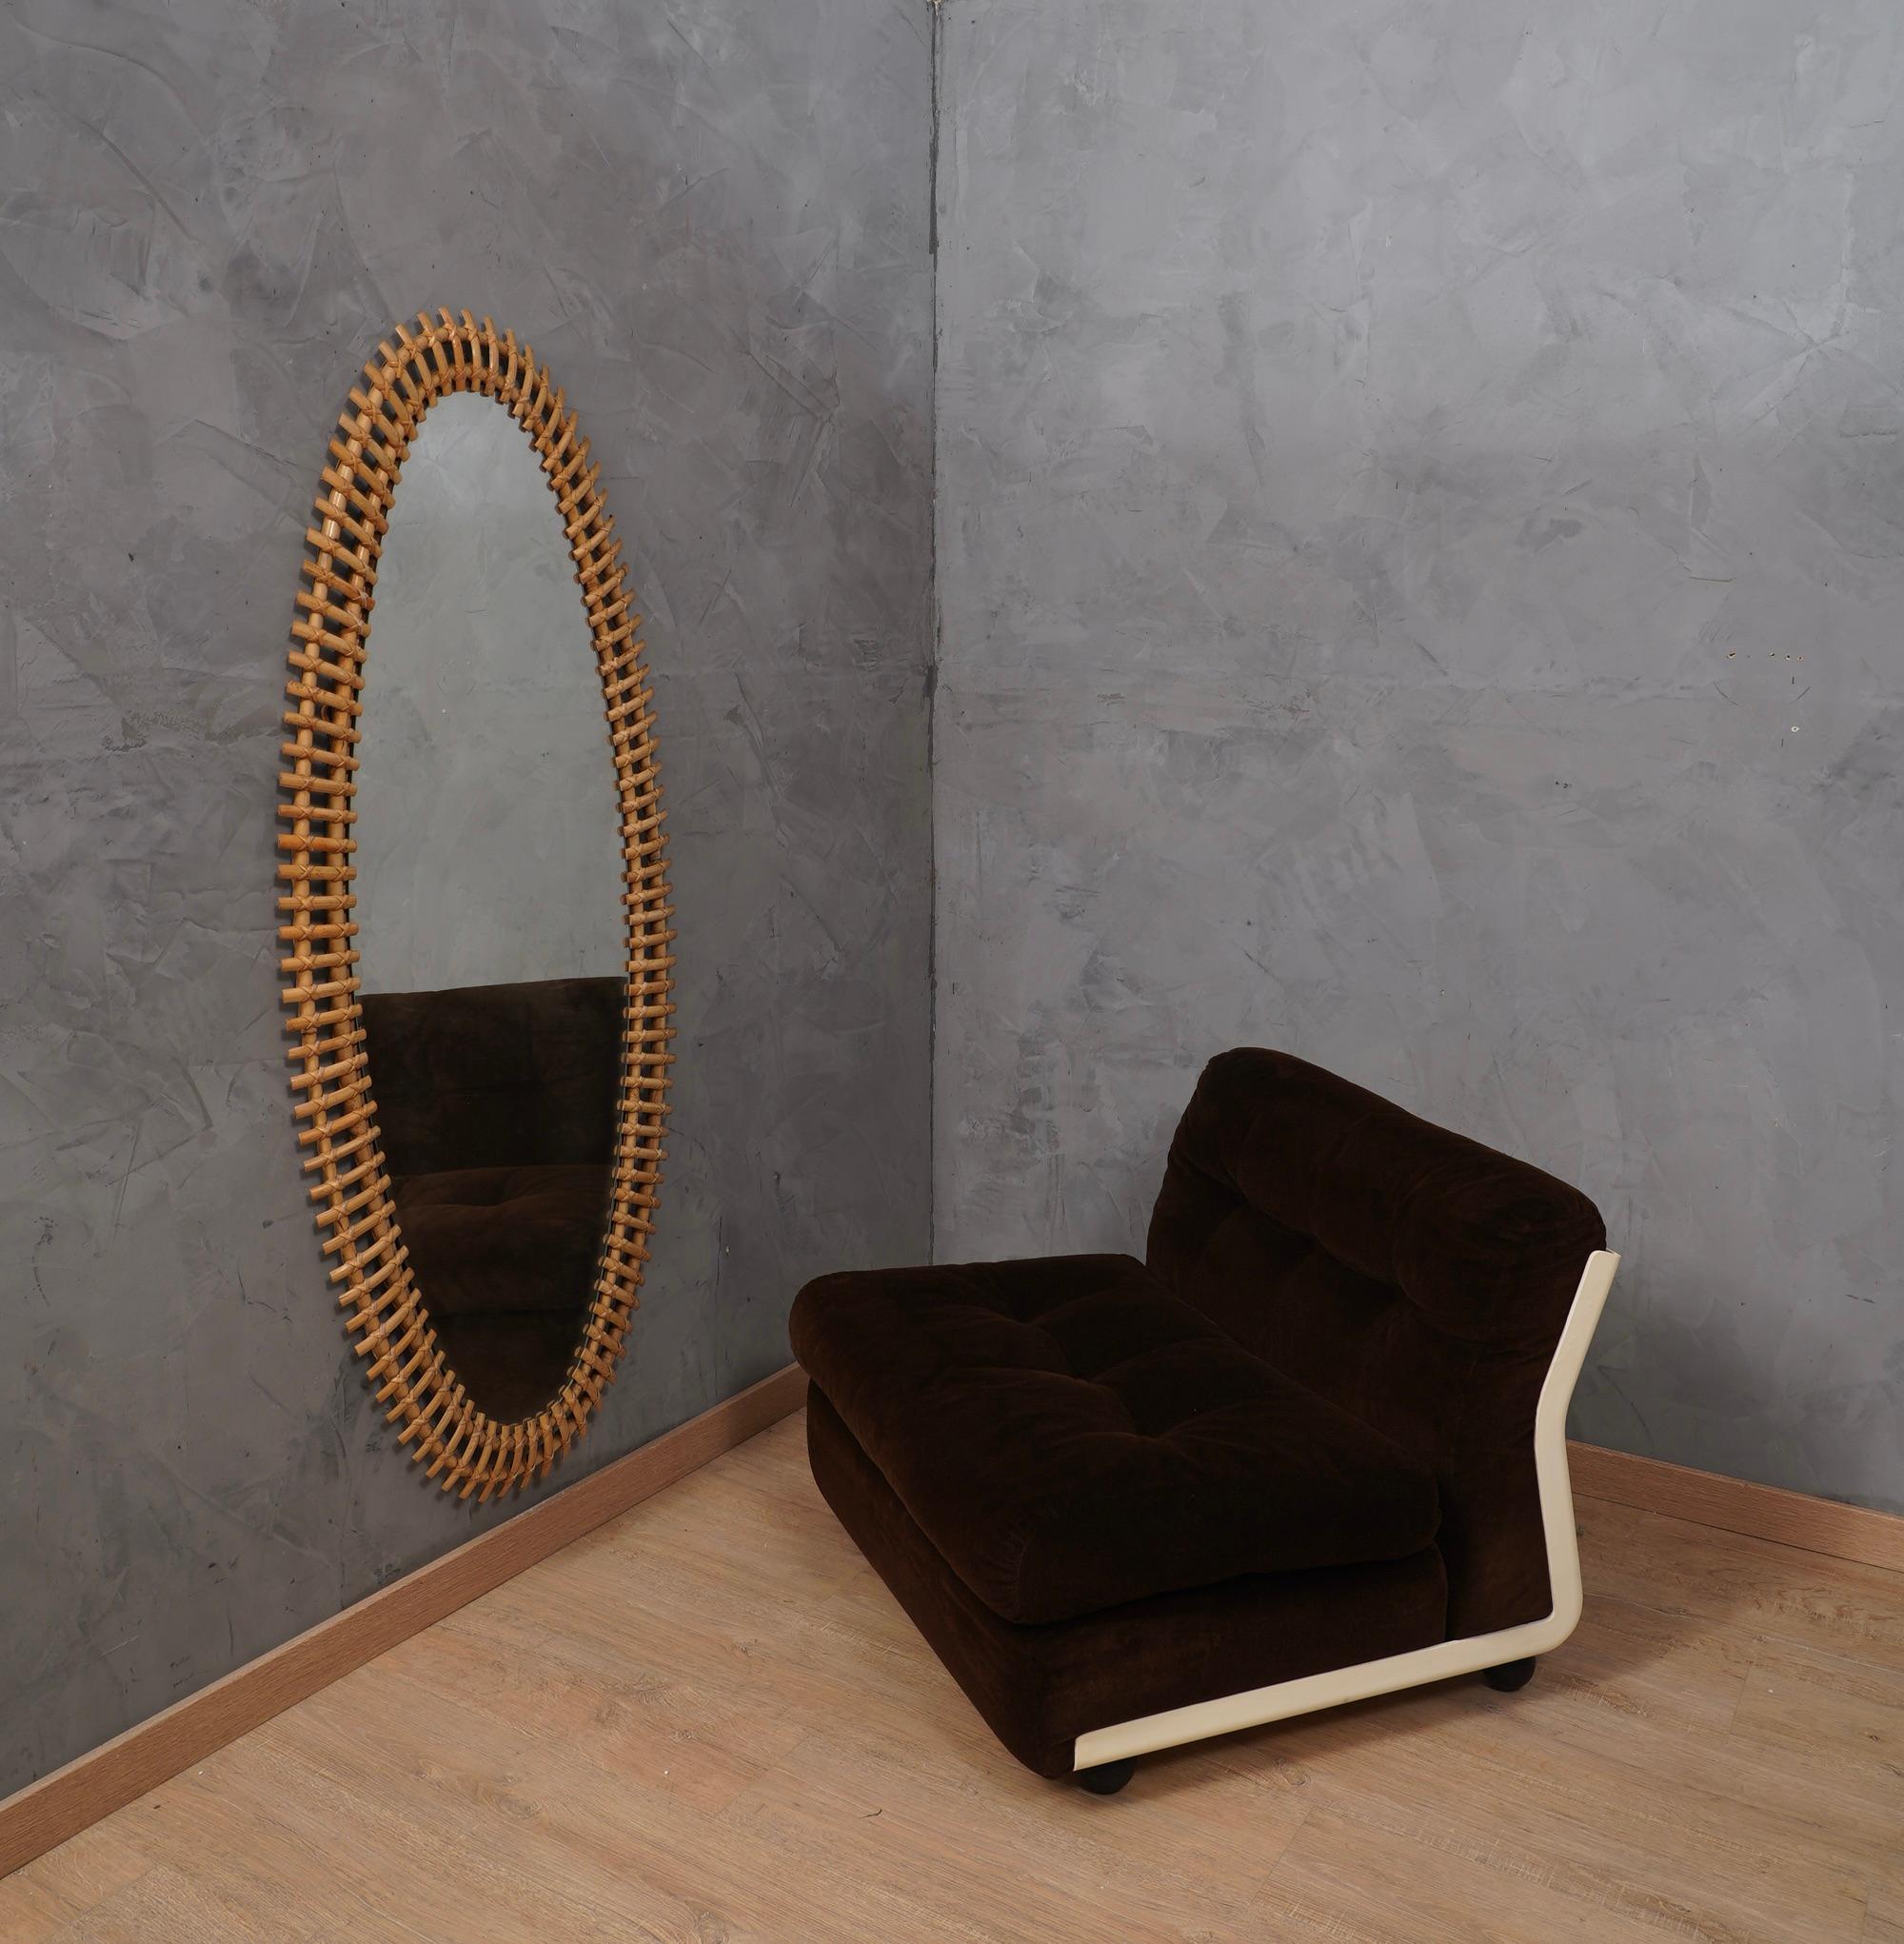 Oval mirror in bamboo and Indian cane binders designed by the Dutch designer Olaf Von Bohr for the Bonacina company in the 1960s. Elegant and versatile, the mirror has a very light and linear design. A union between architect and company that in the